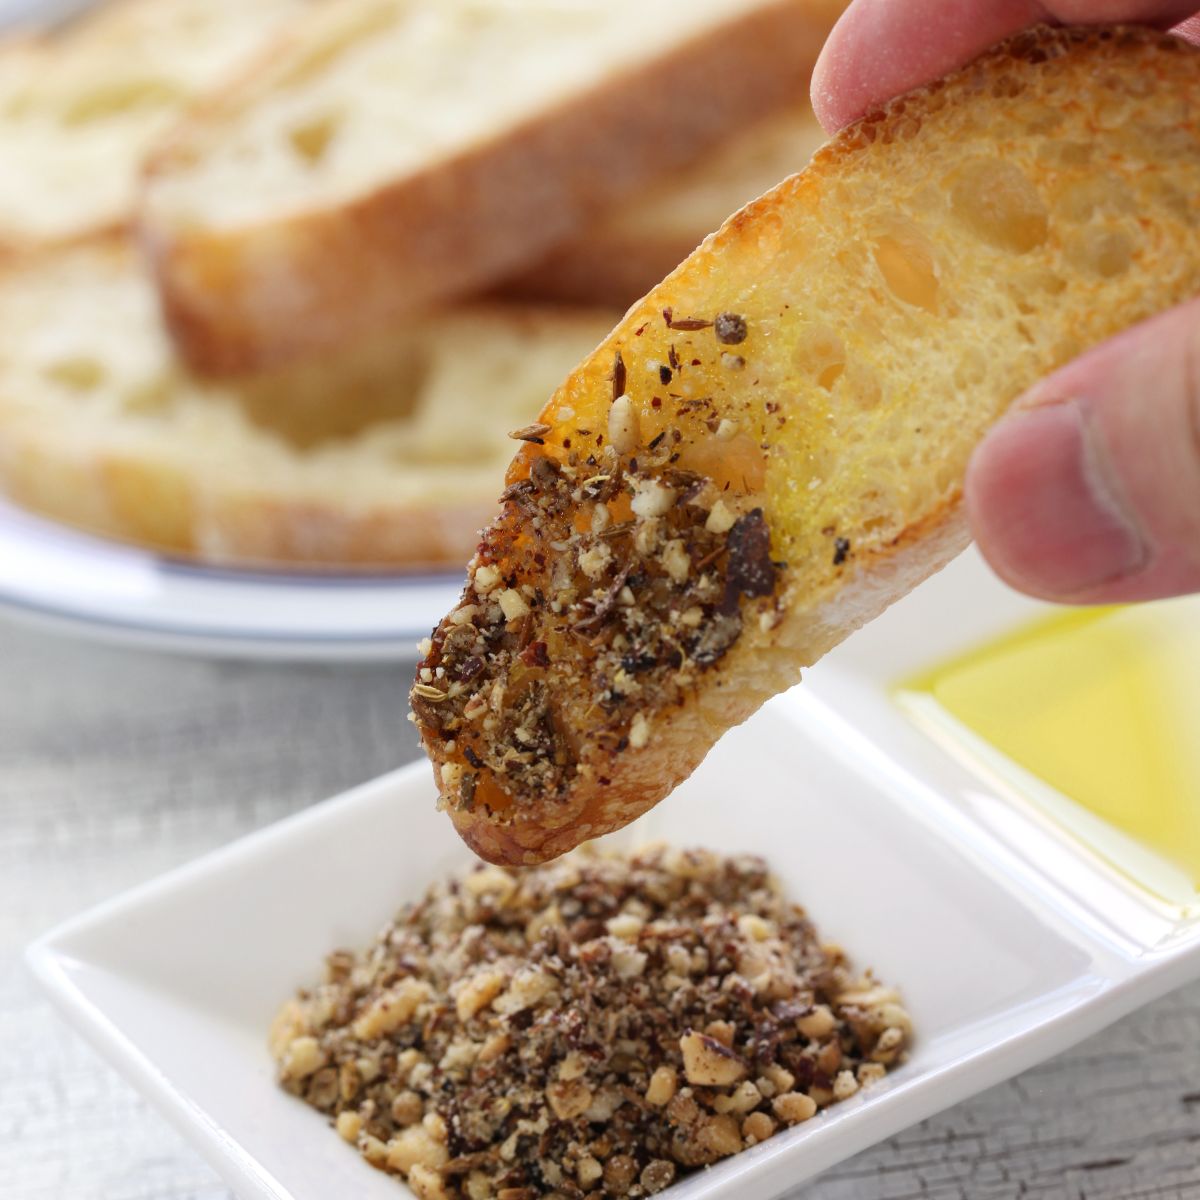 Hand dipping bread into olive oil and dukkah